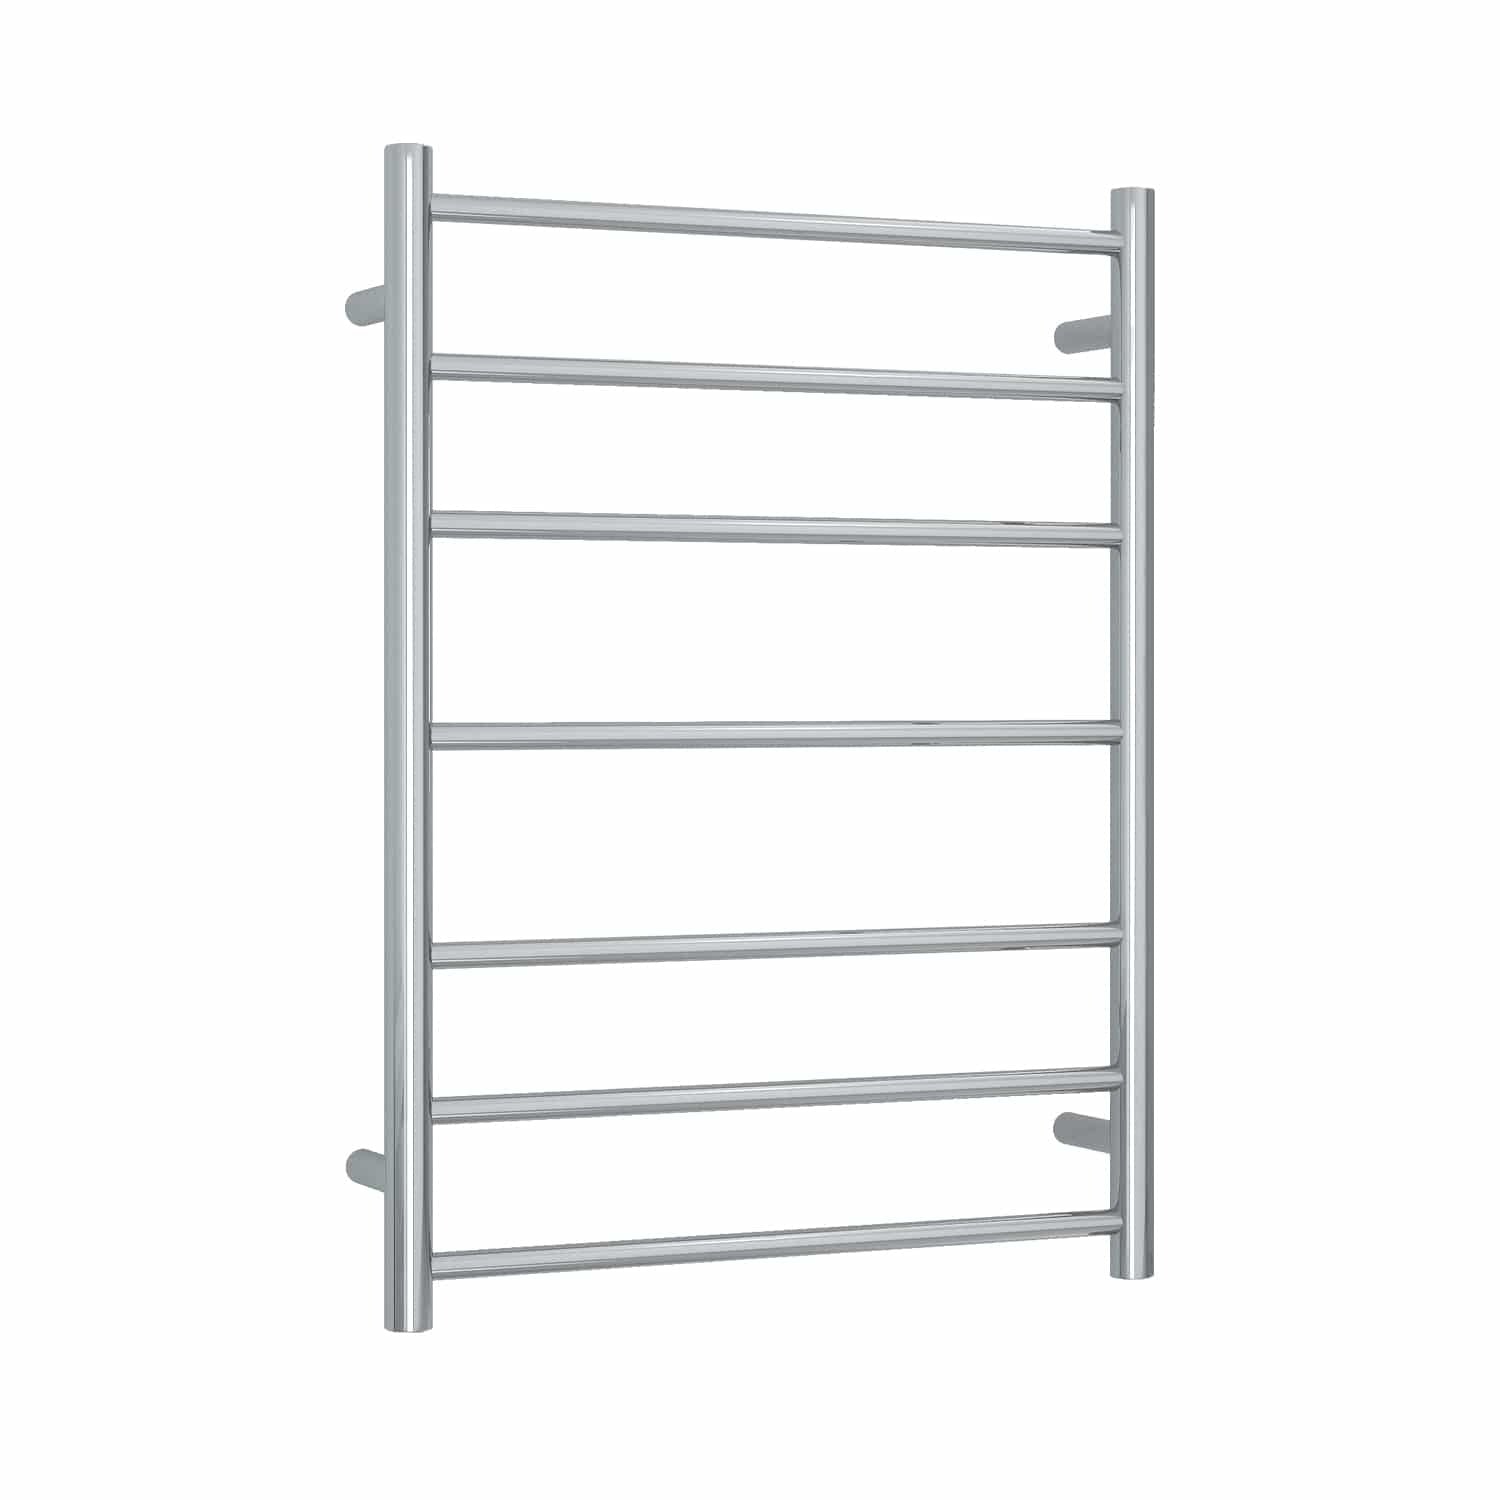 THERMOGROUP ROUND LADDER HEATED TOWEL RAIL BRUSHED STAINLESS STEEL 800MM